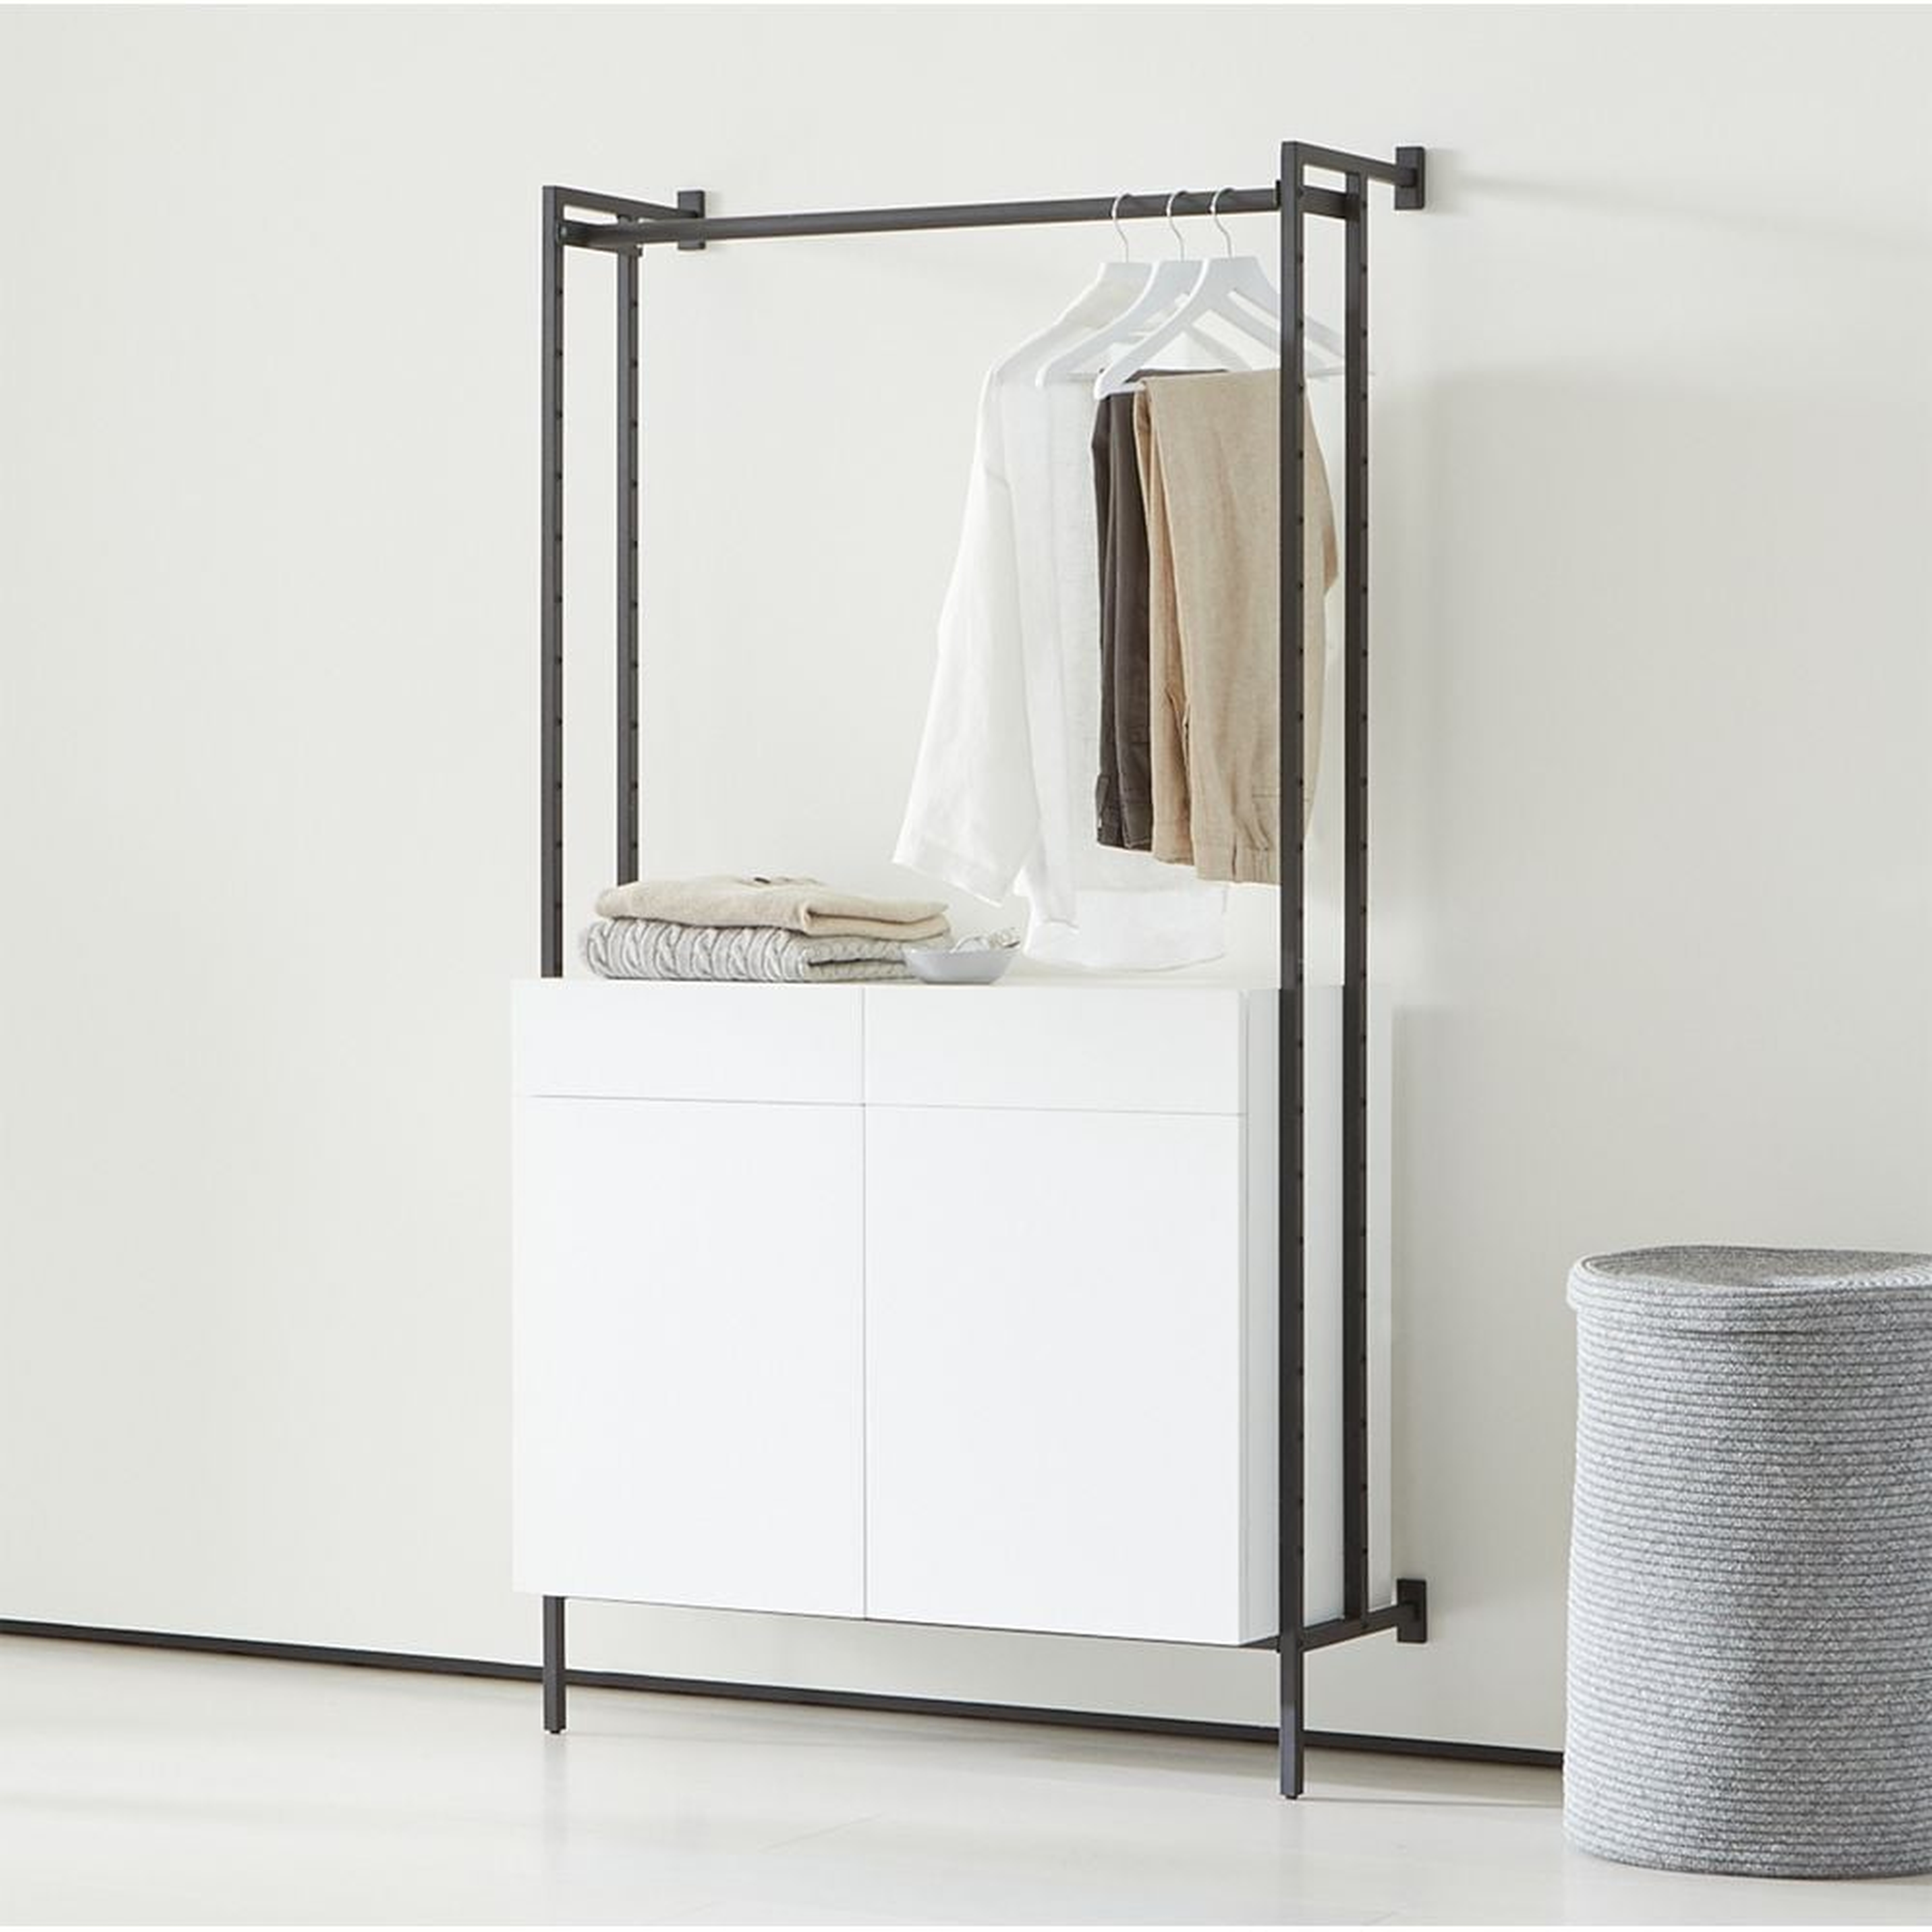 Flex Modular Closed Storage Cabinet with Clothing Bar - Crate and Barrel